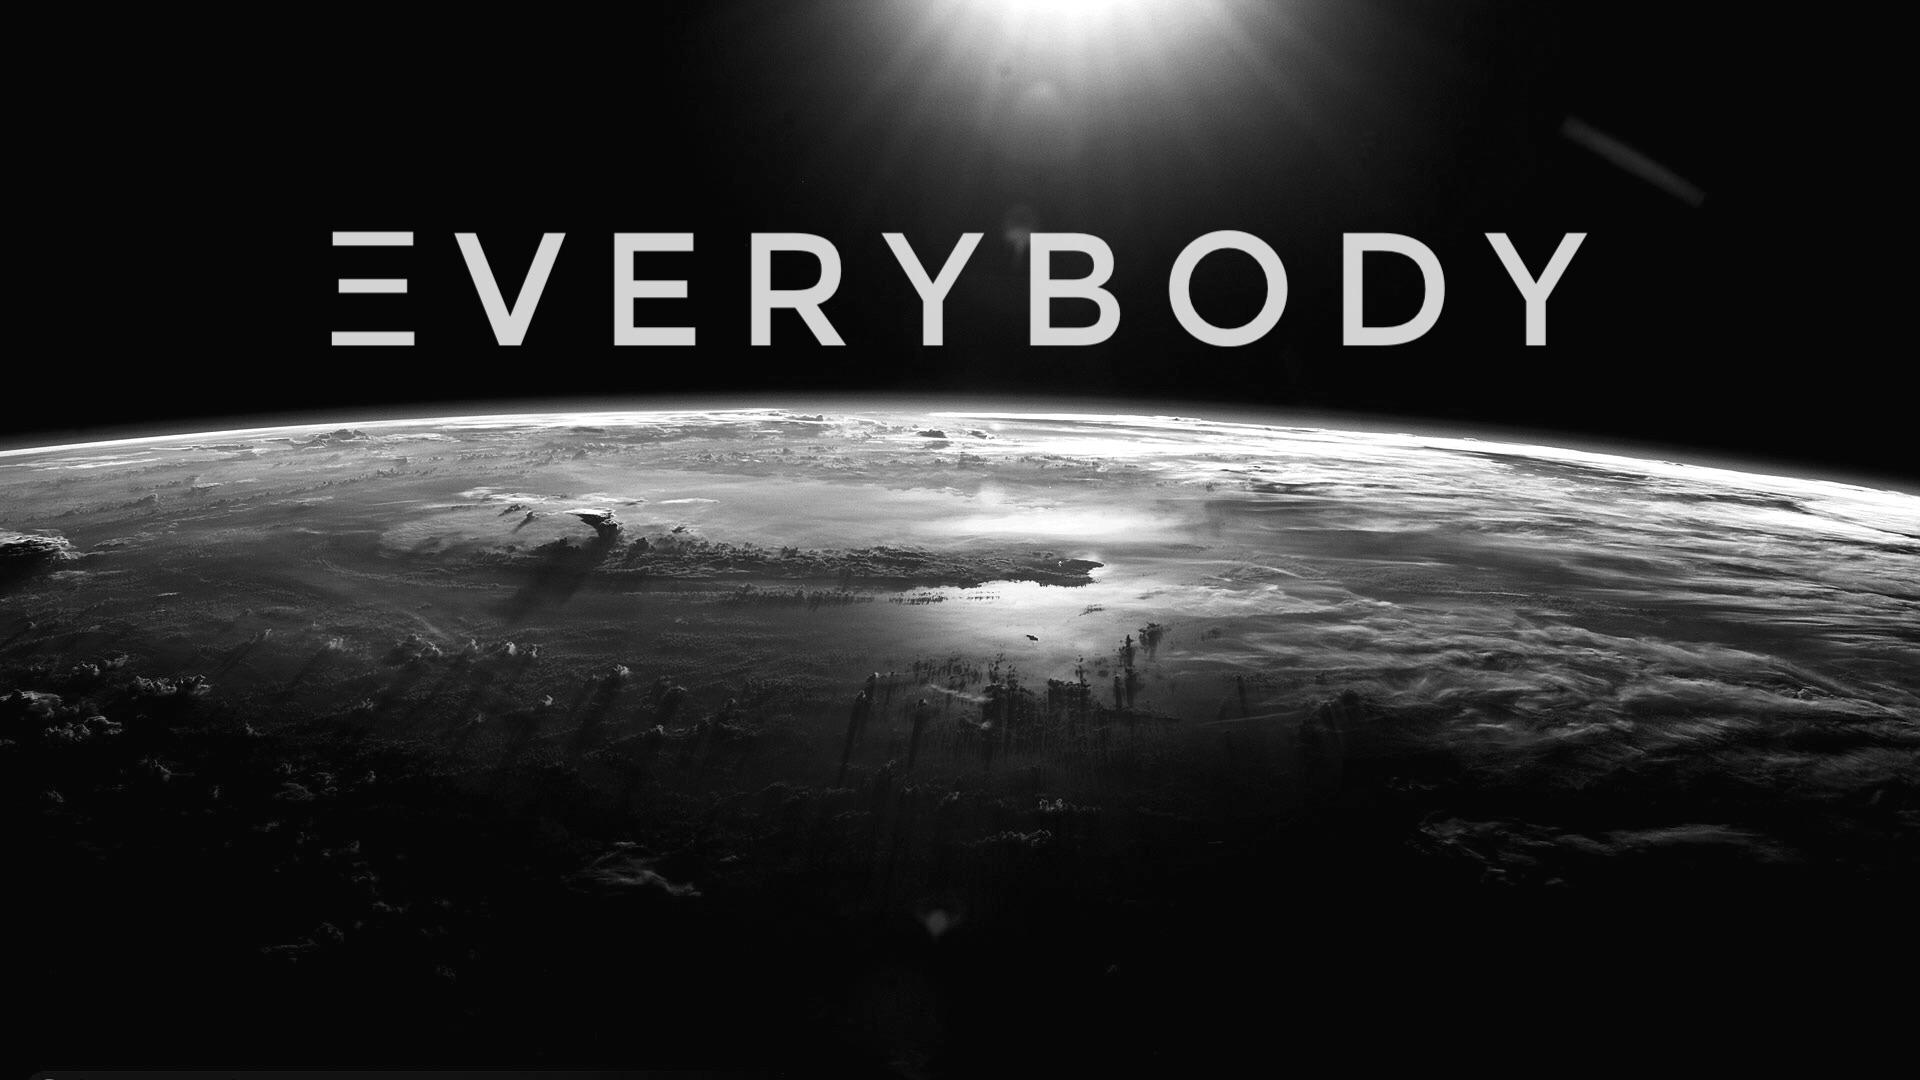 Everybody was to the world